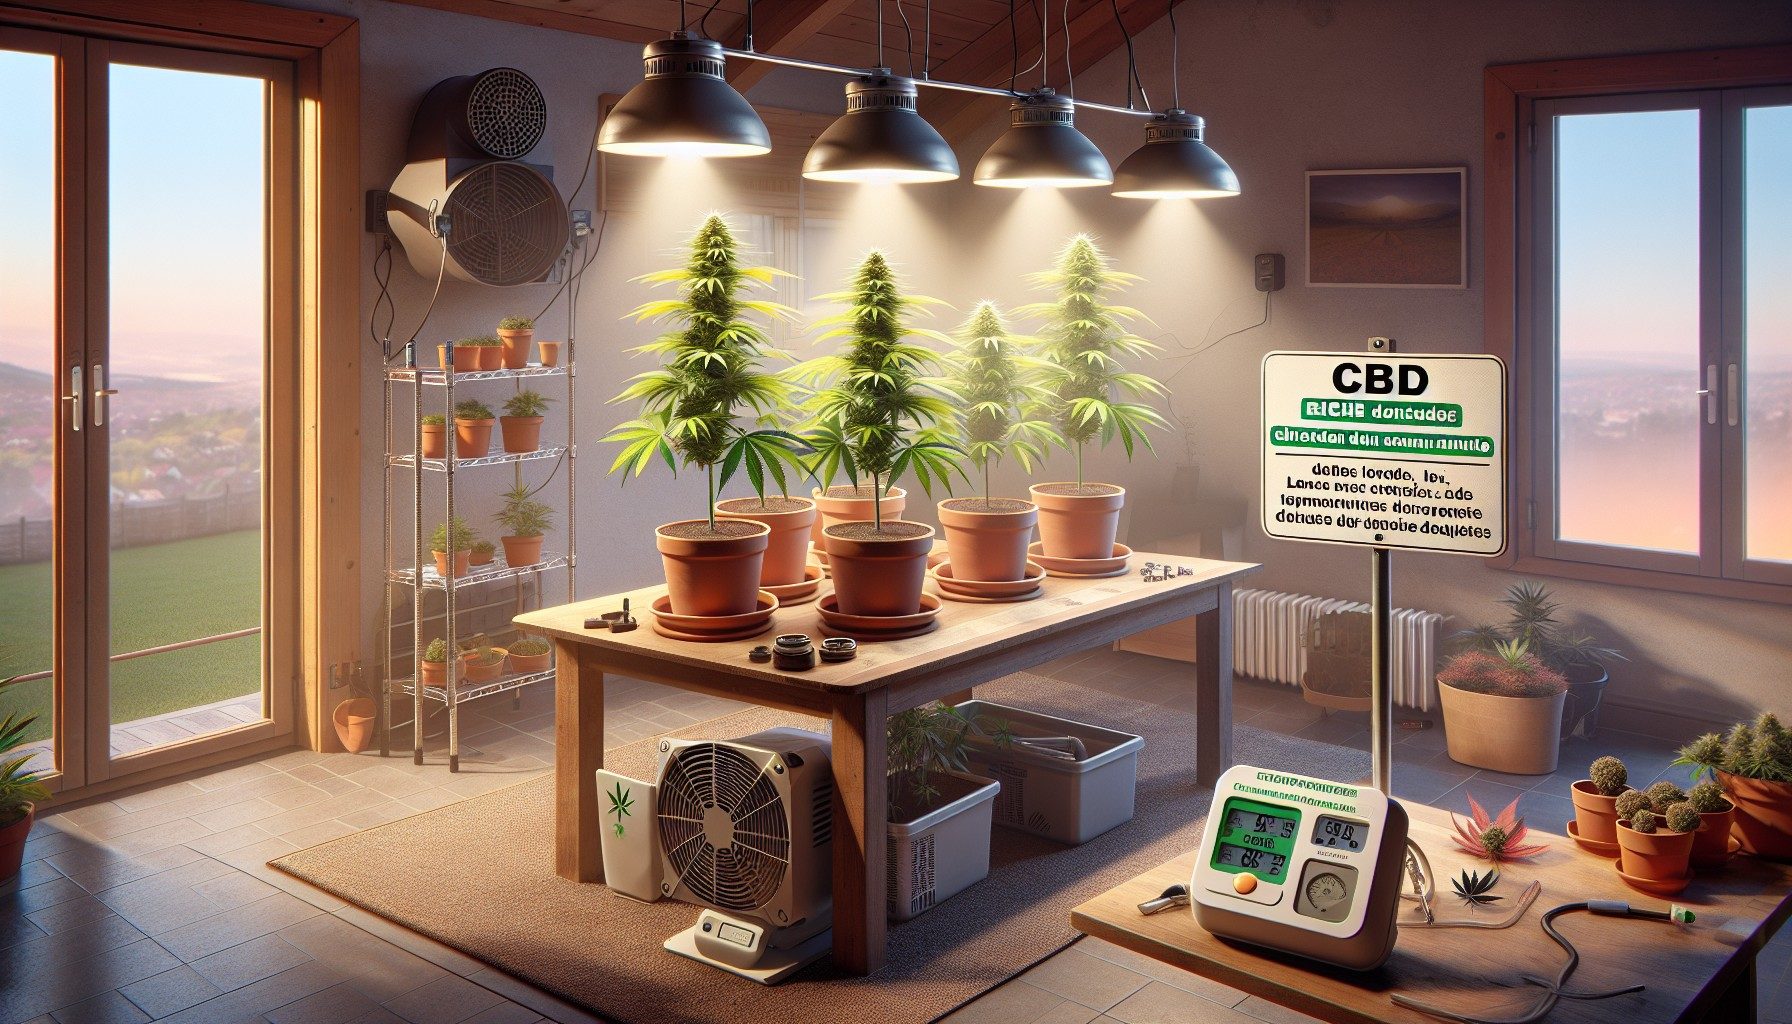 Can you grow CBD at home in France?